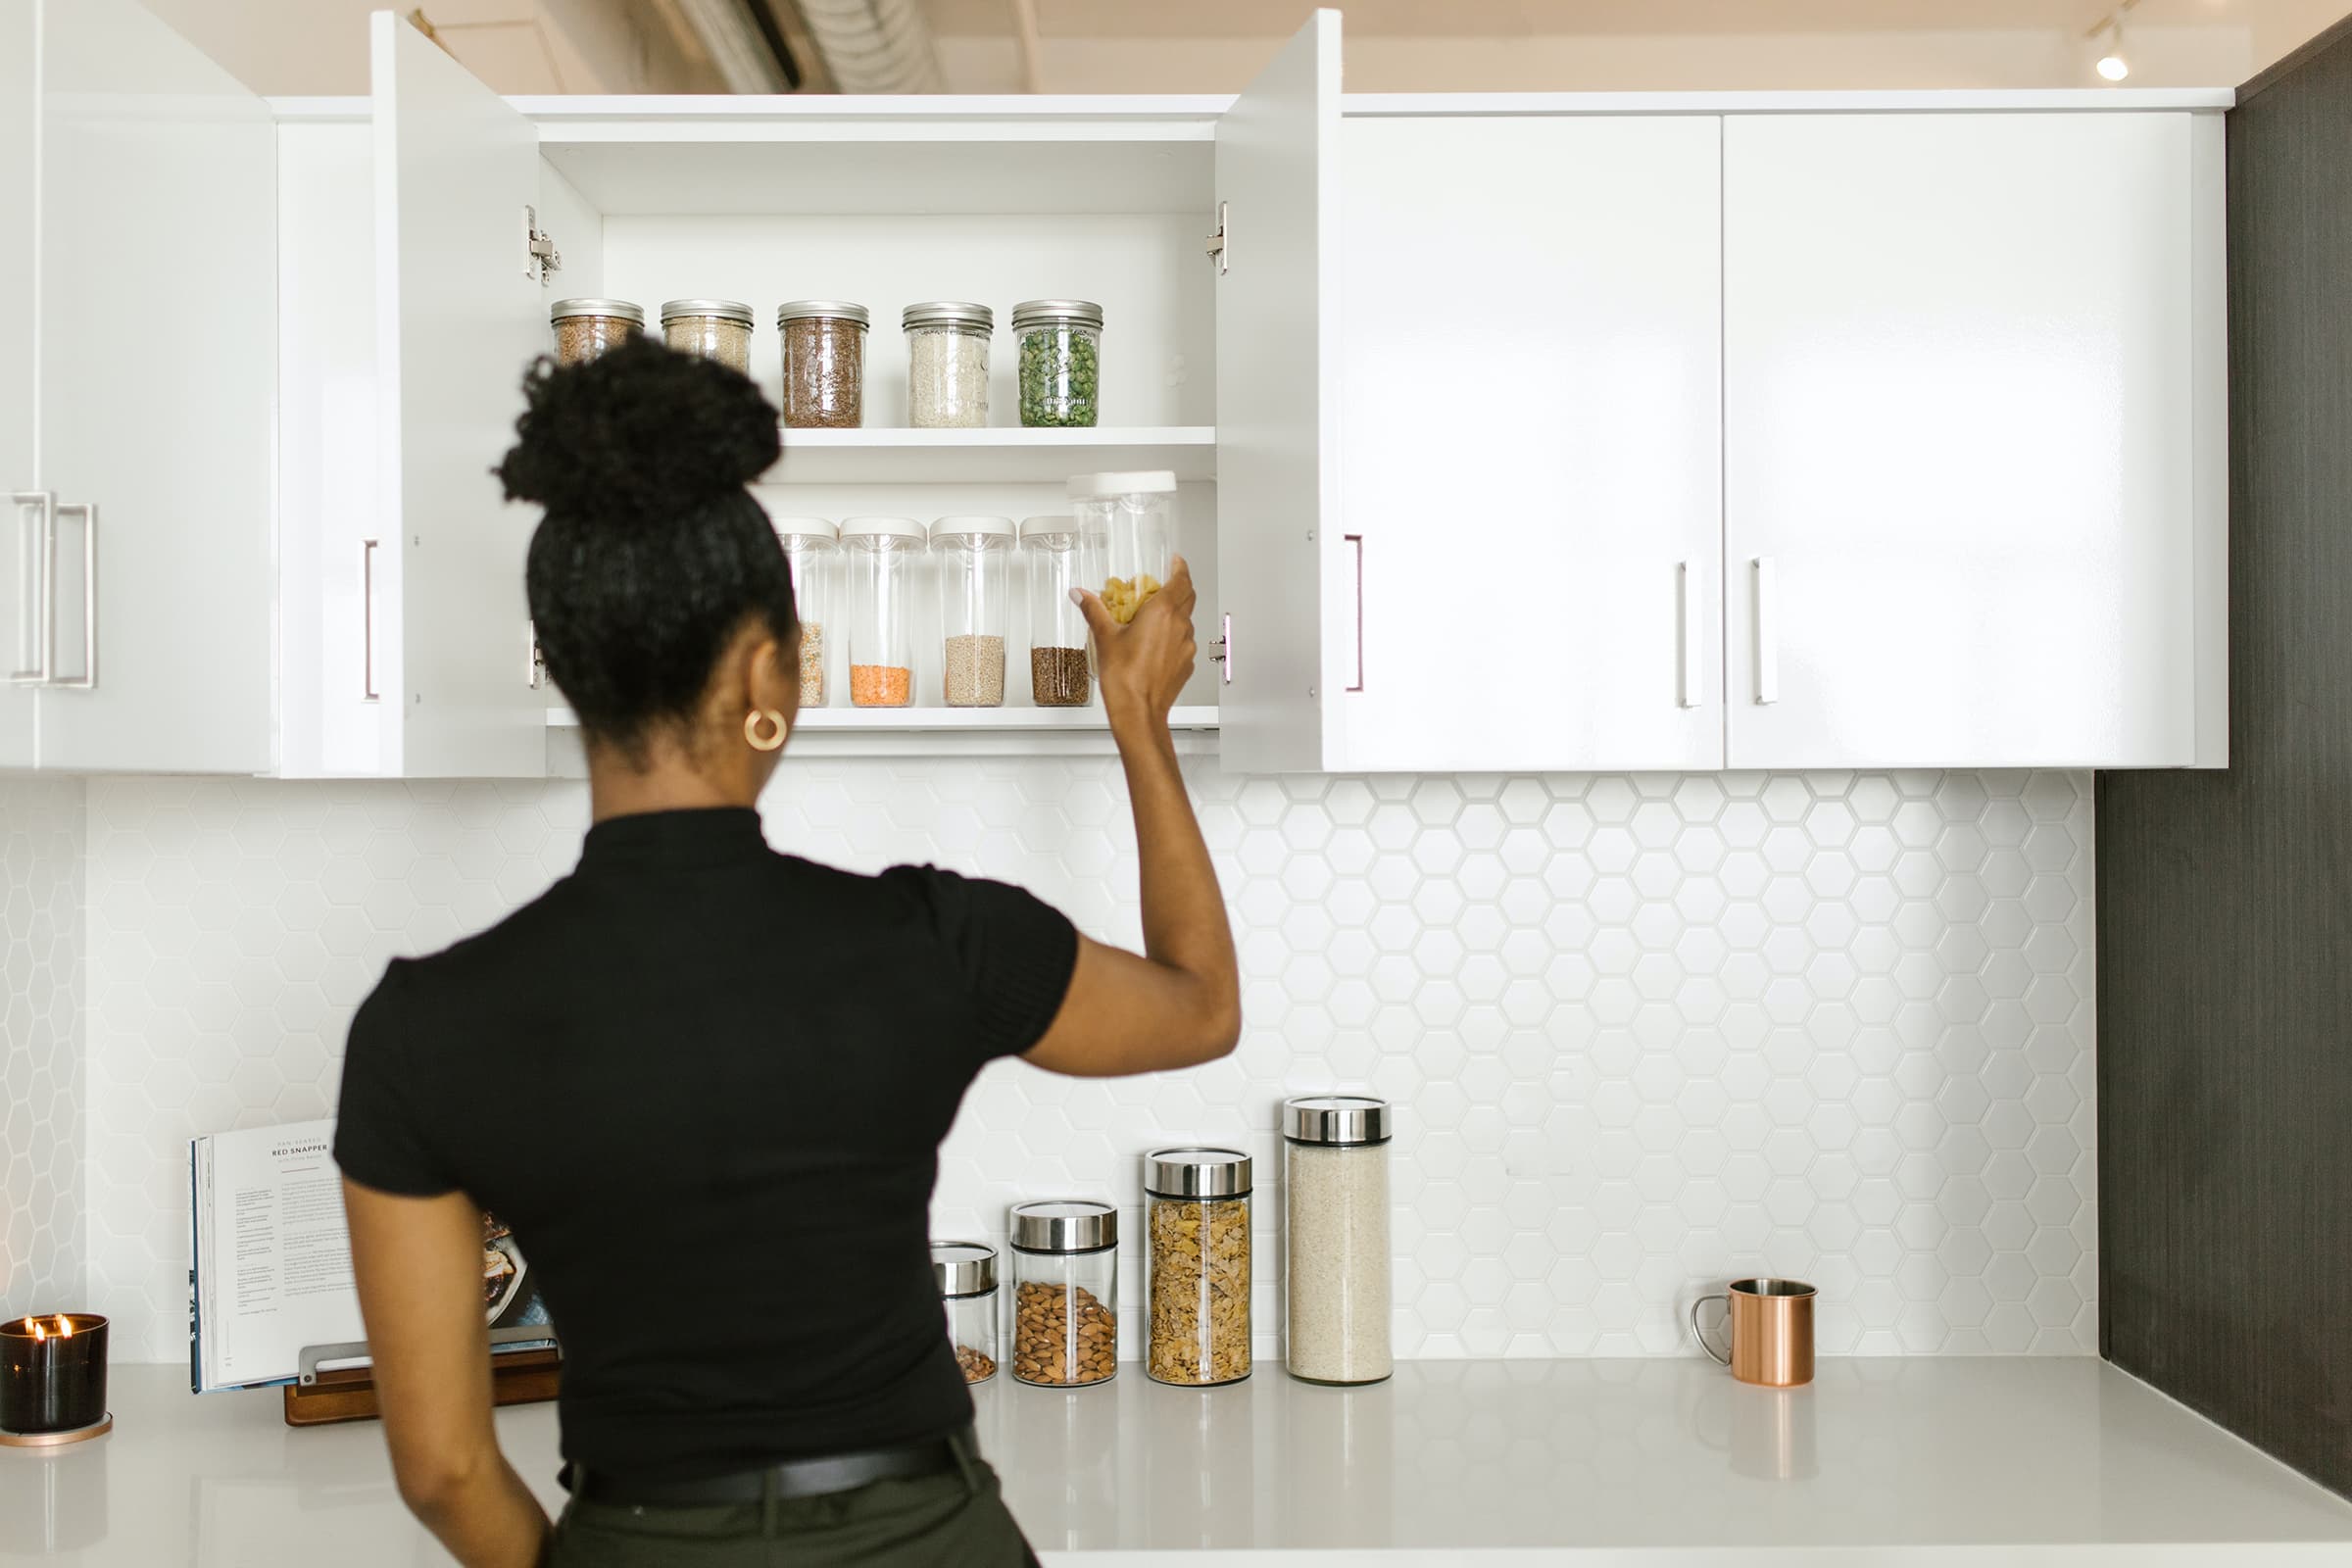 Afro-American woman tidies up the pantry